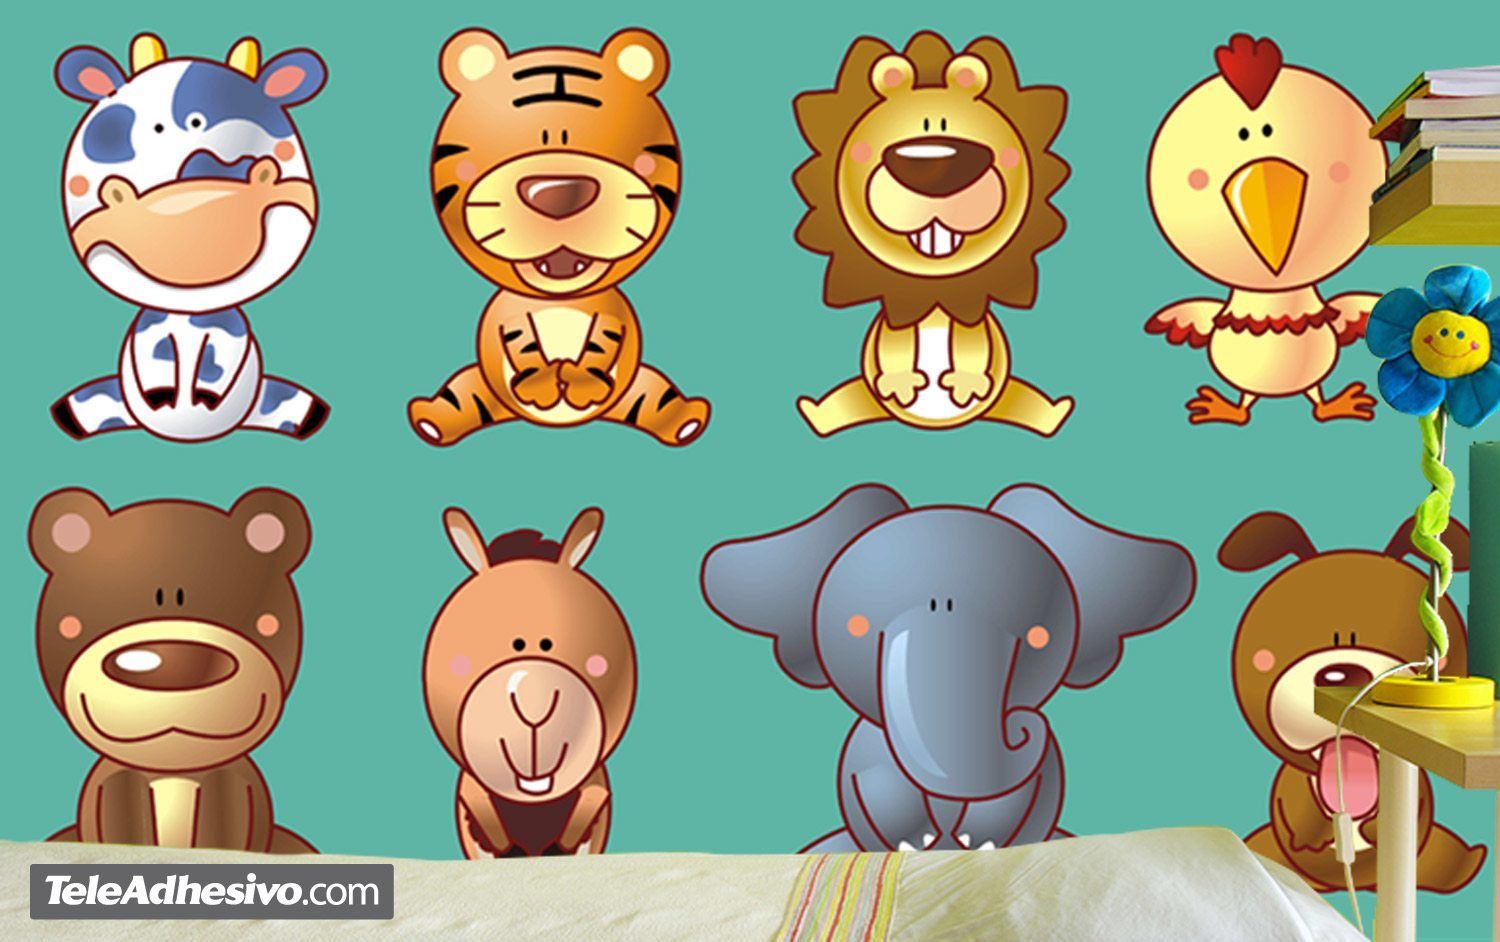 Stickers for Kids: Friendly animals